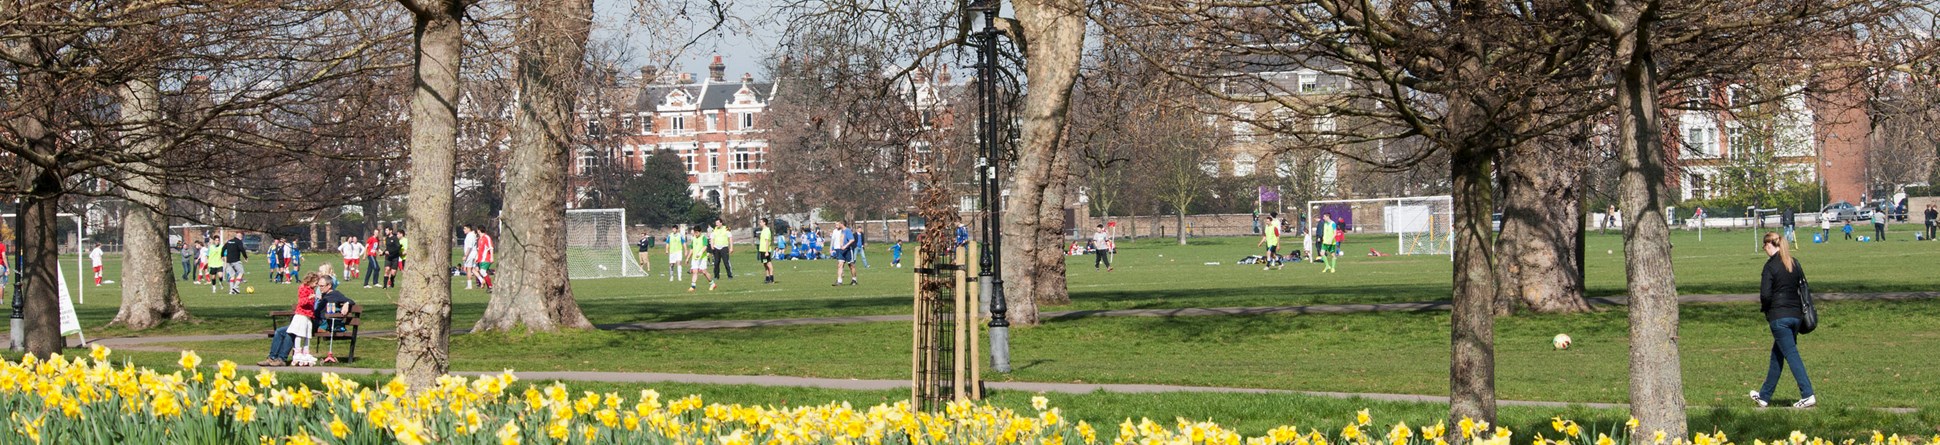 Visitors playing football at Clapham Common